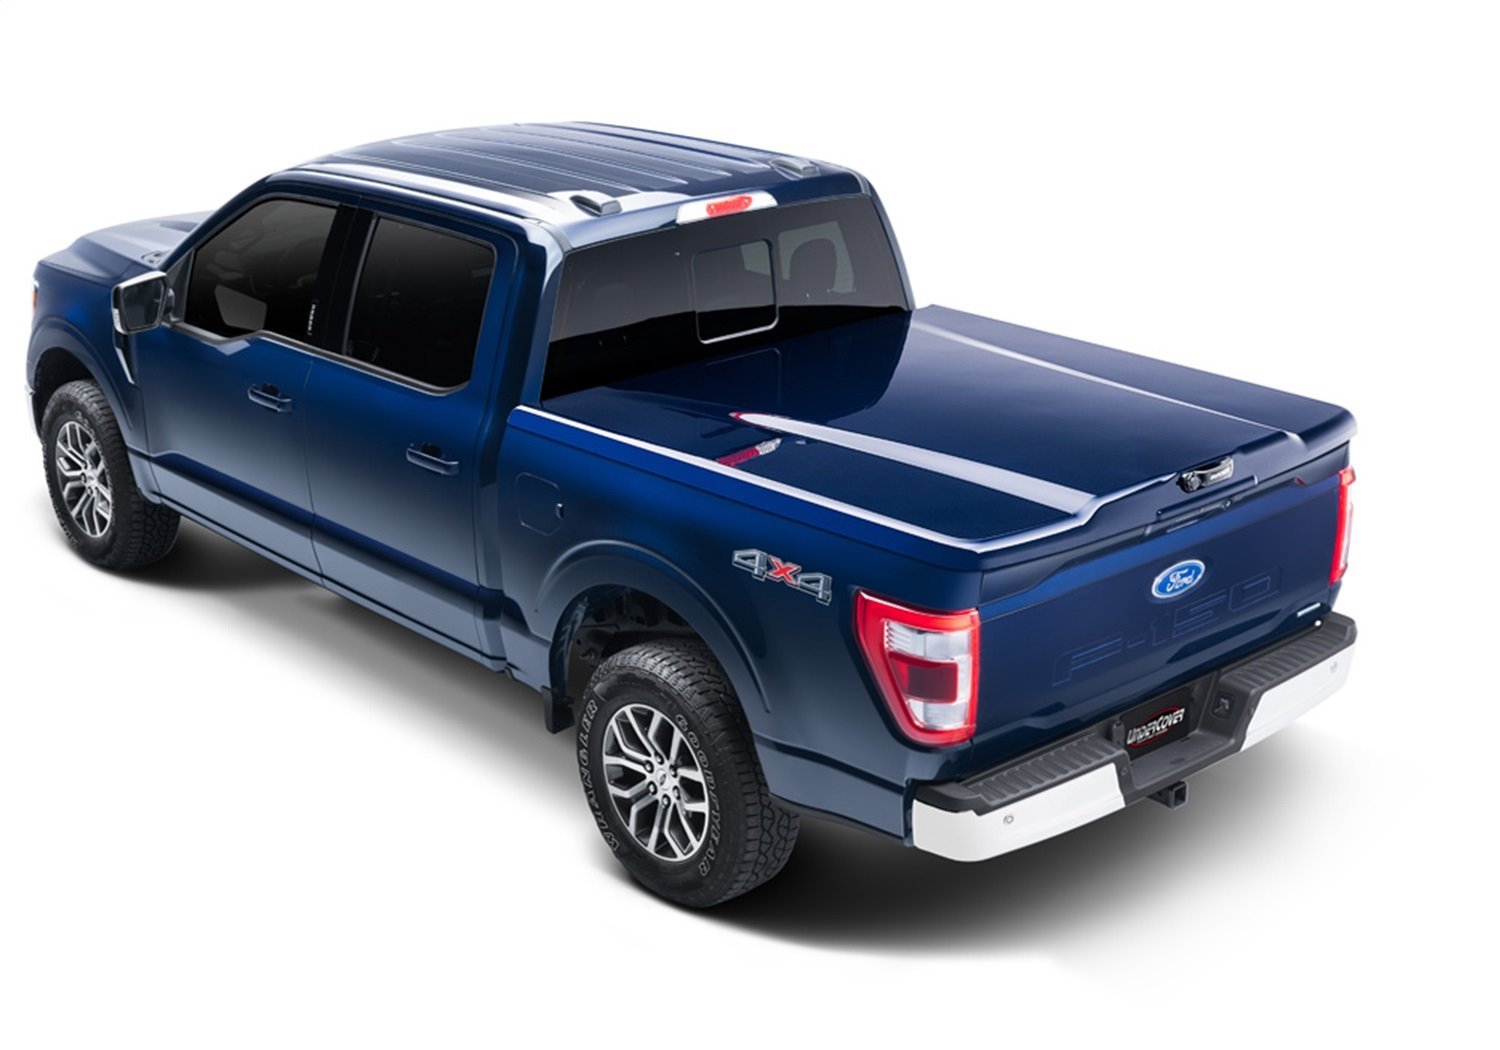 UC2228L-YZ Elite LX Hard Non-Folding Cover, Fits Select Ford F-250 6'10" Bed EXT/Crew Cab, YZ Oxford White